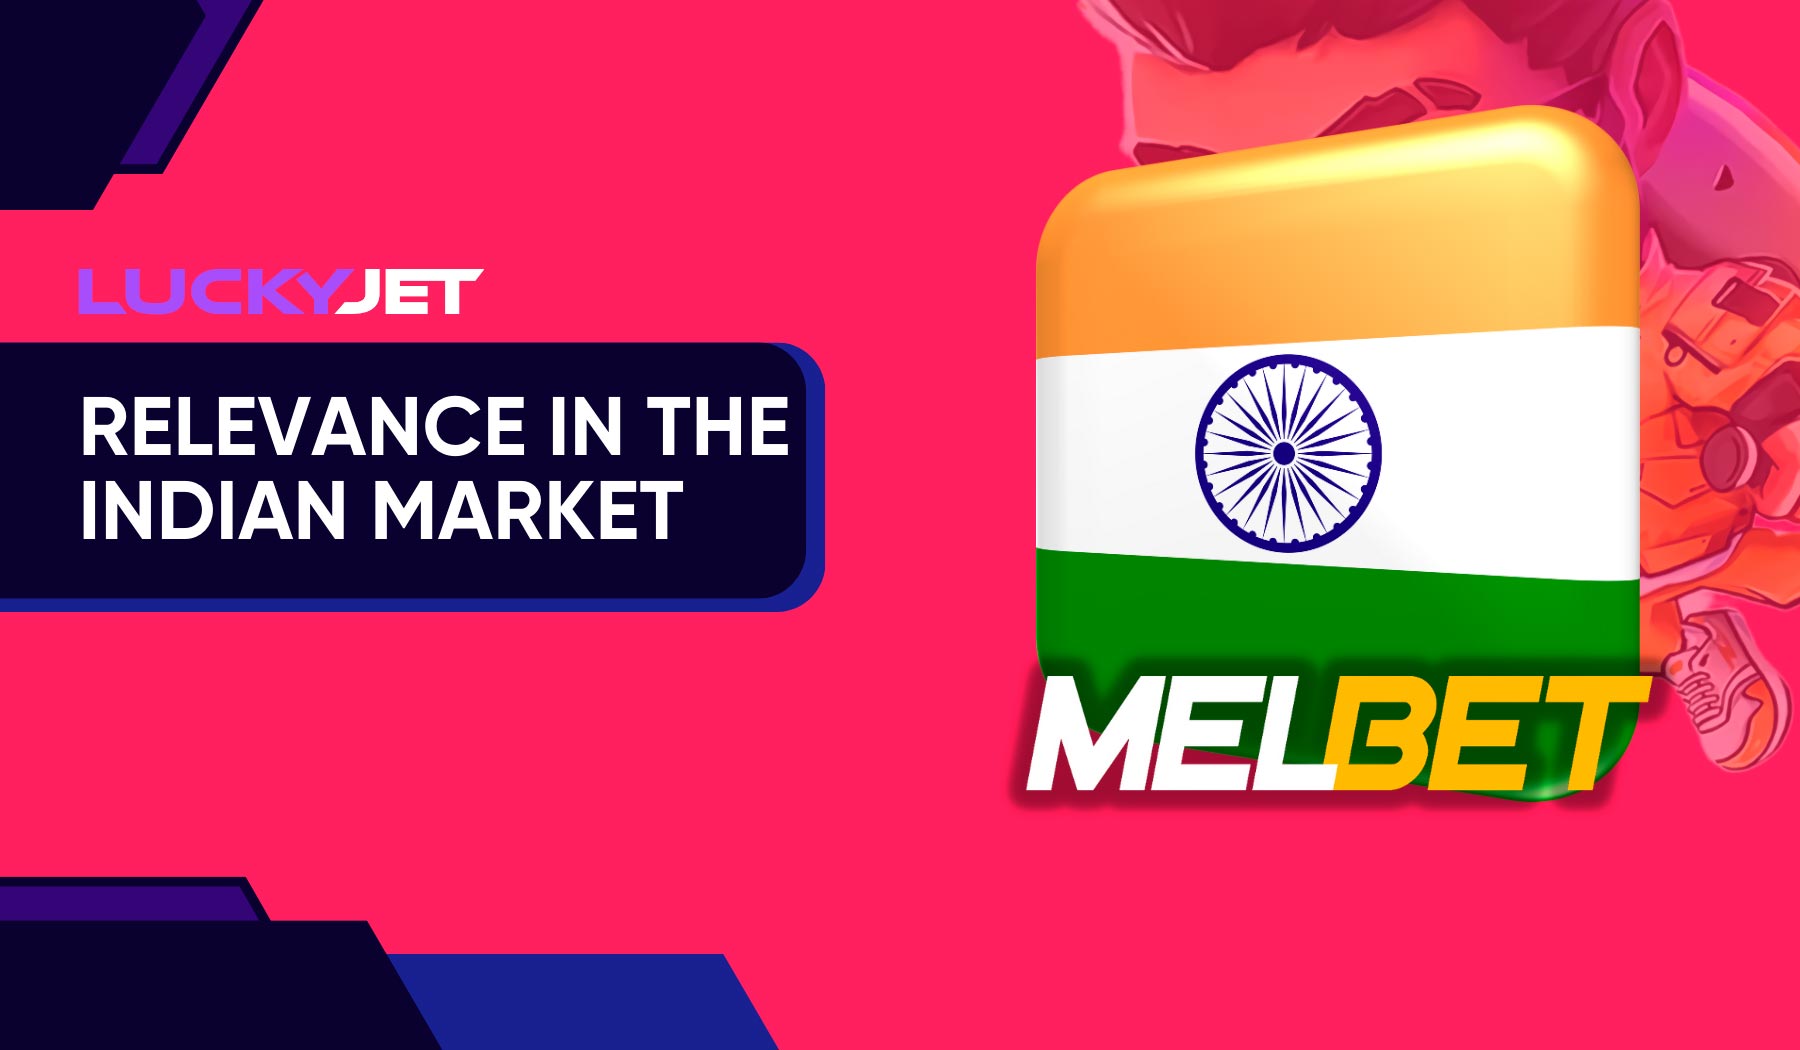 Lucky Jet Melbet in the Indian market